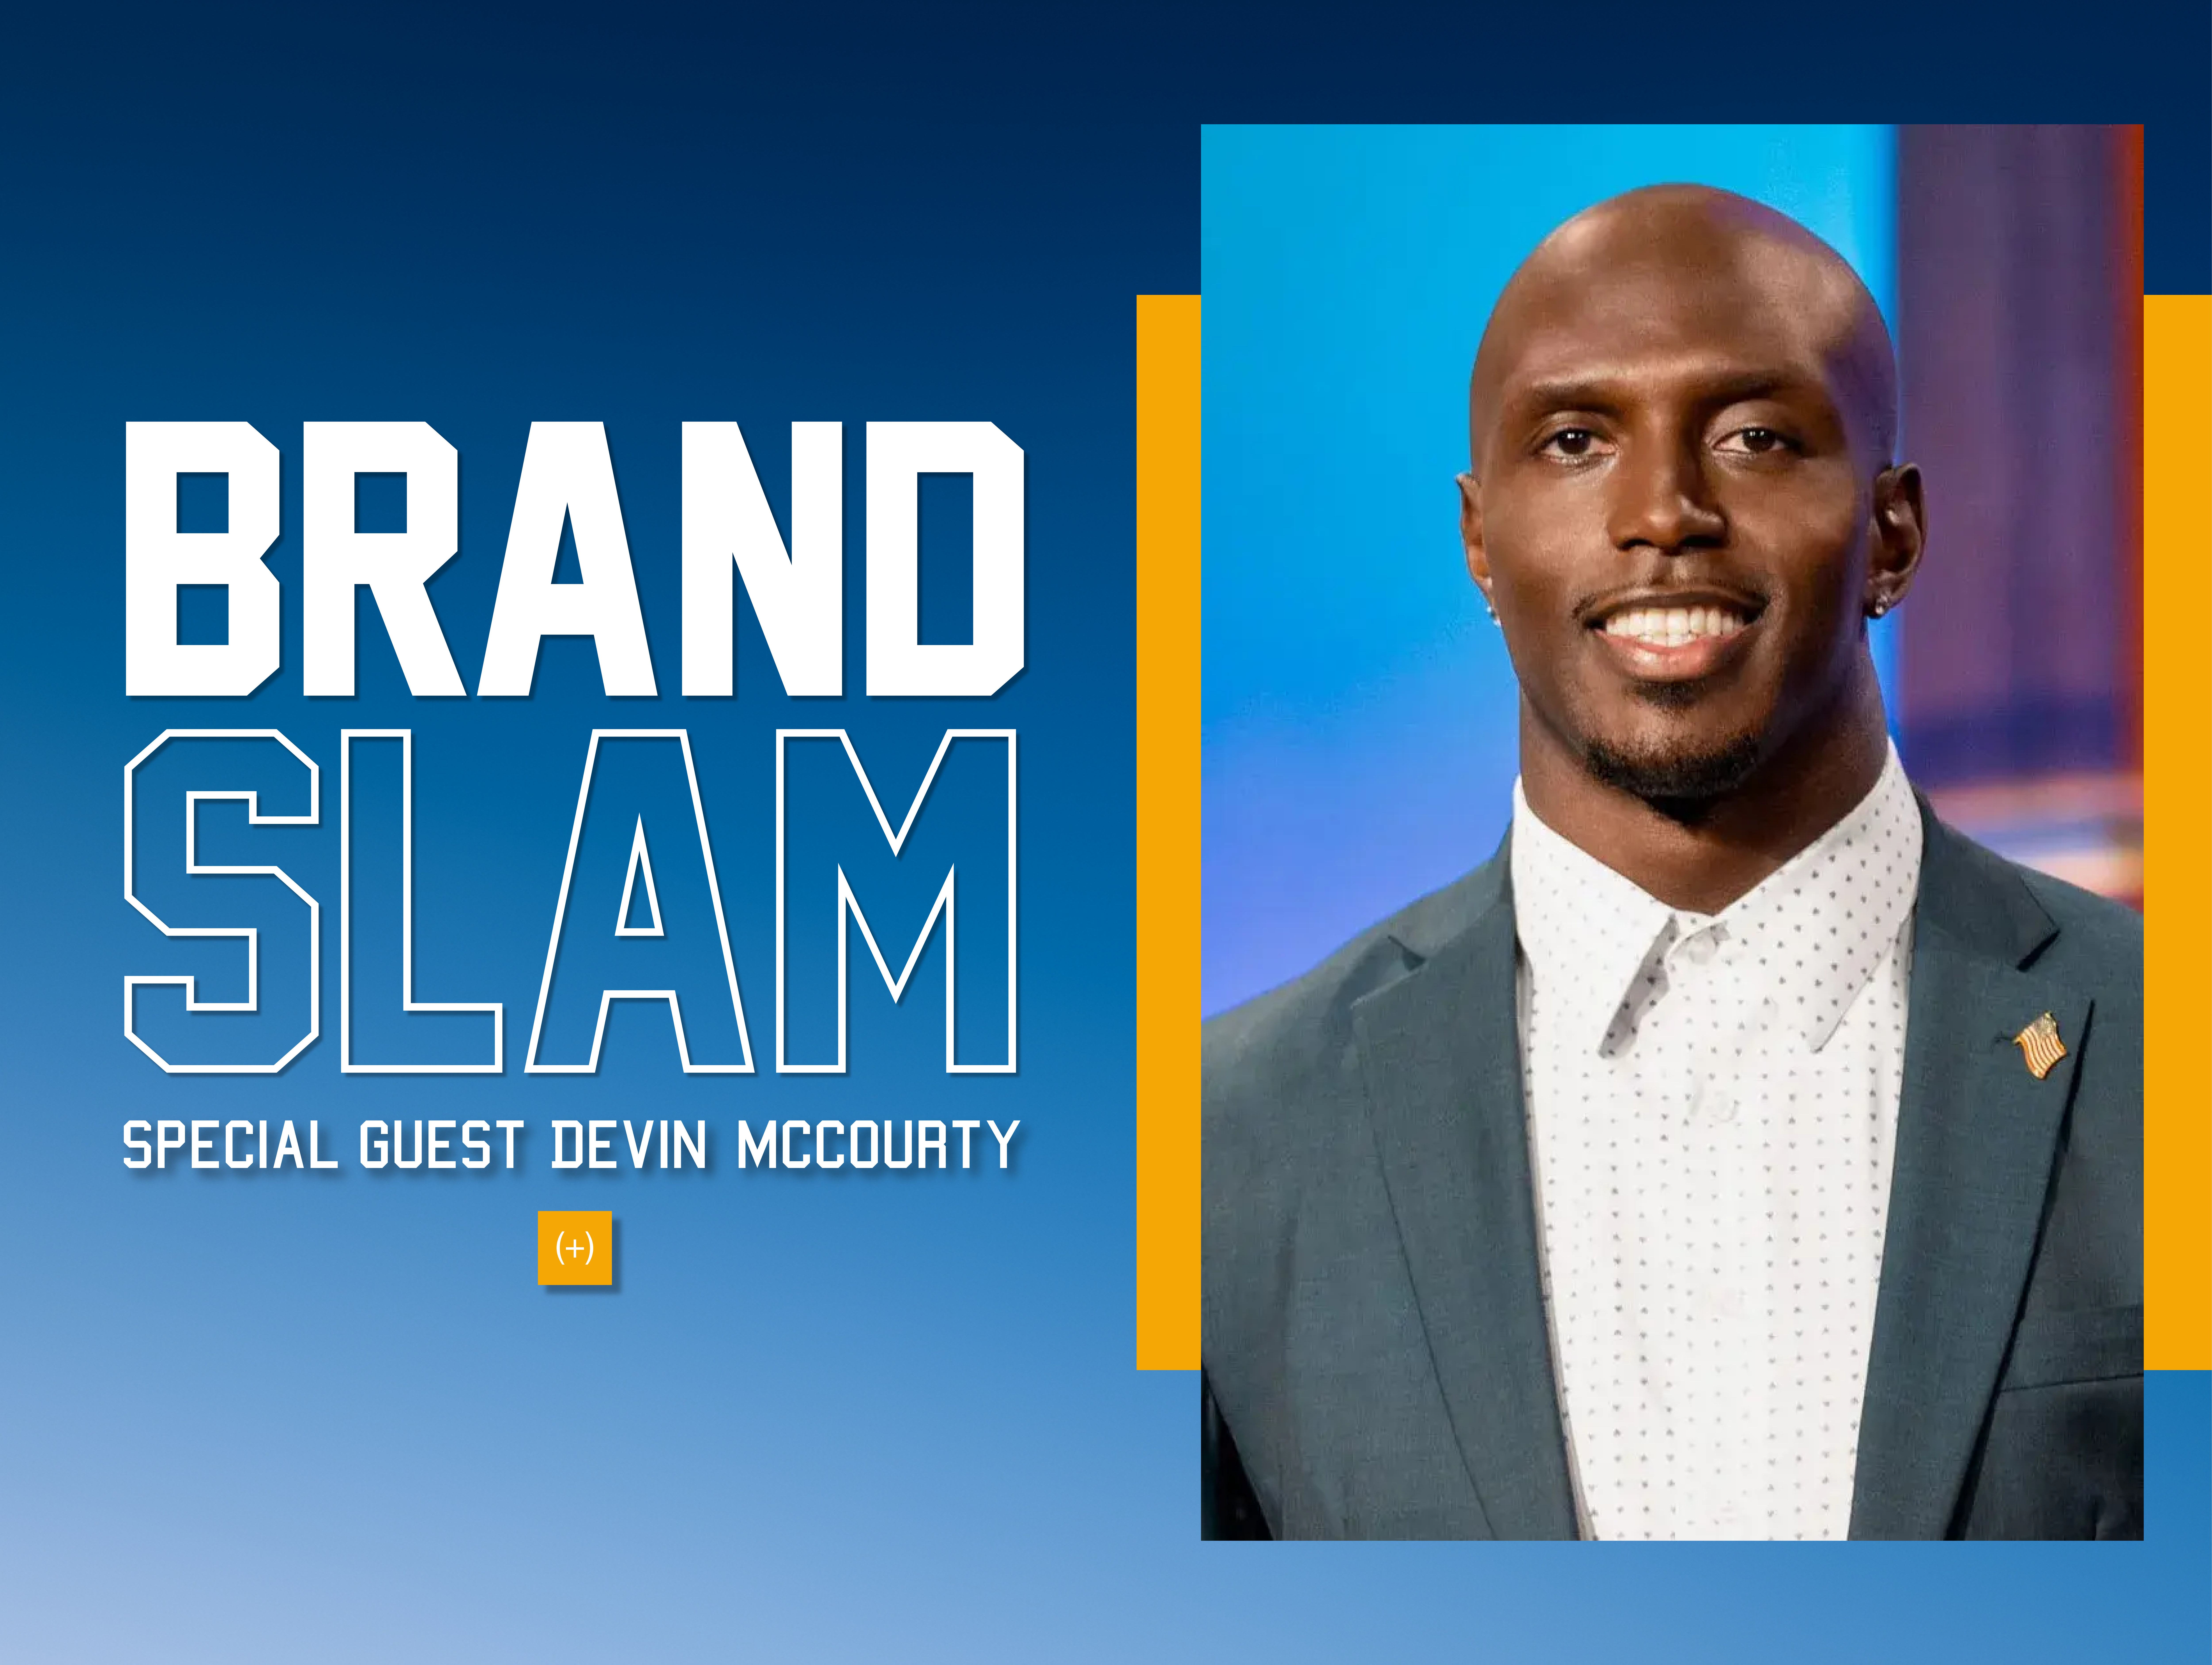 Brand Slam podcast logo and photo of Devin McCourty.